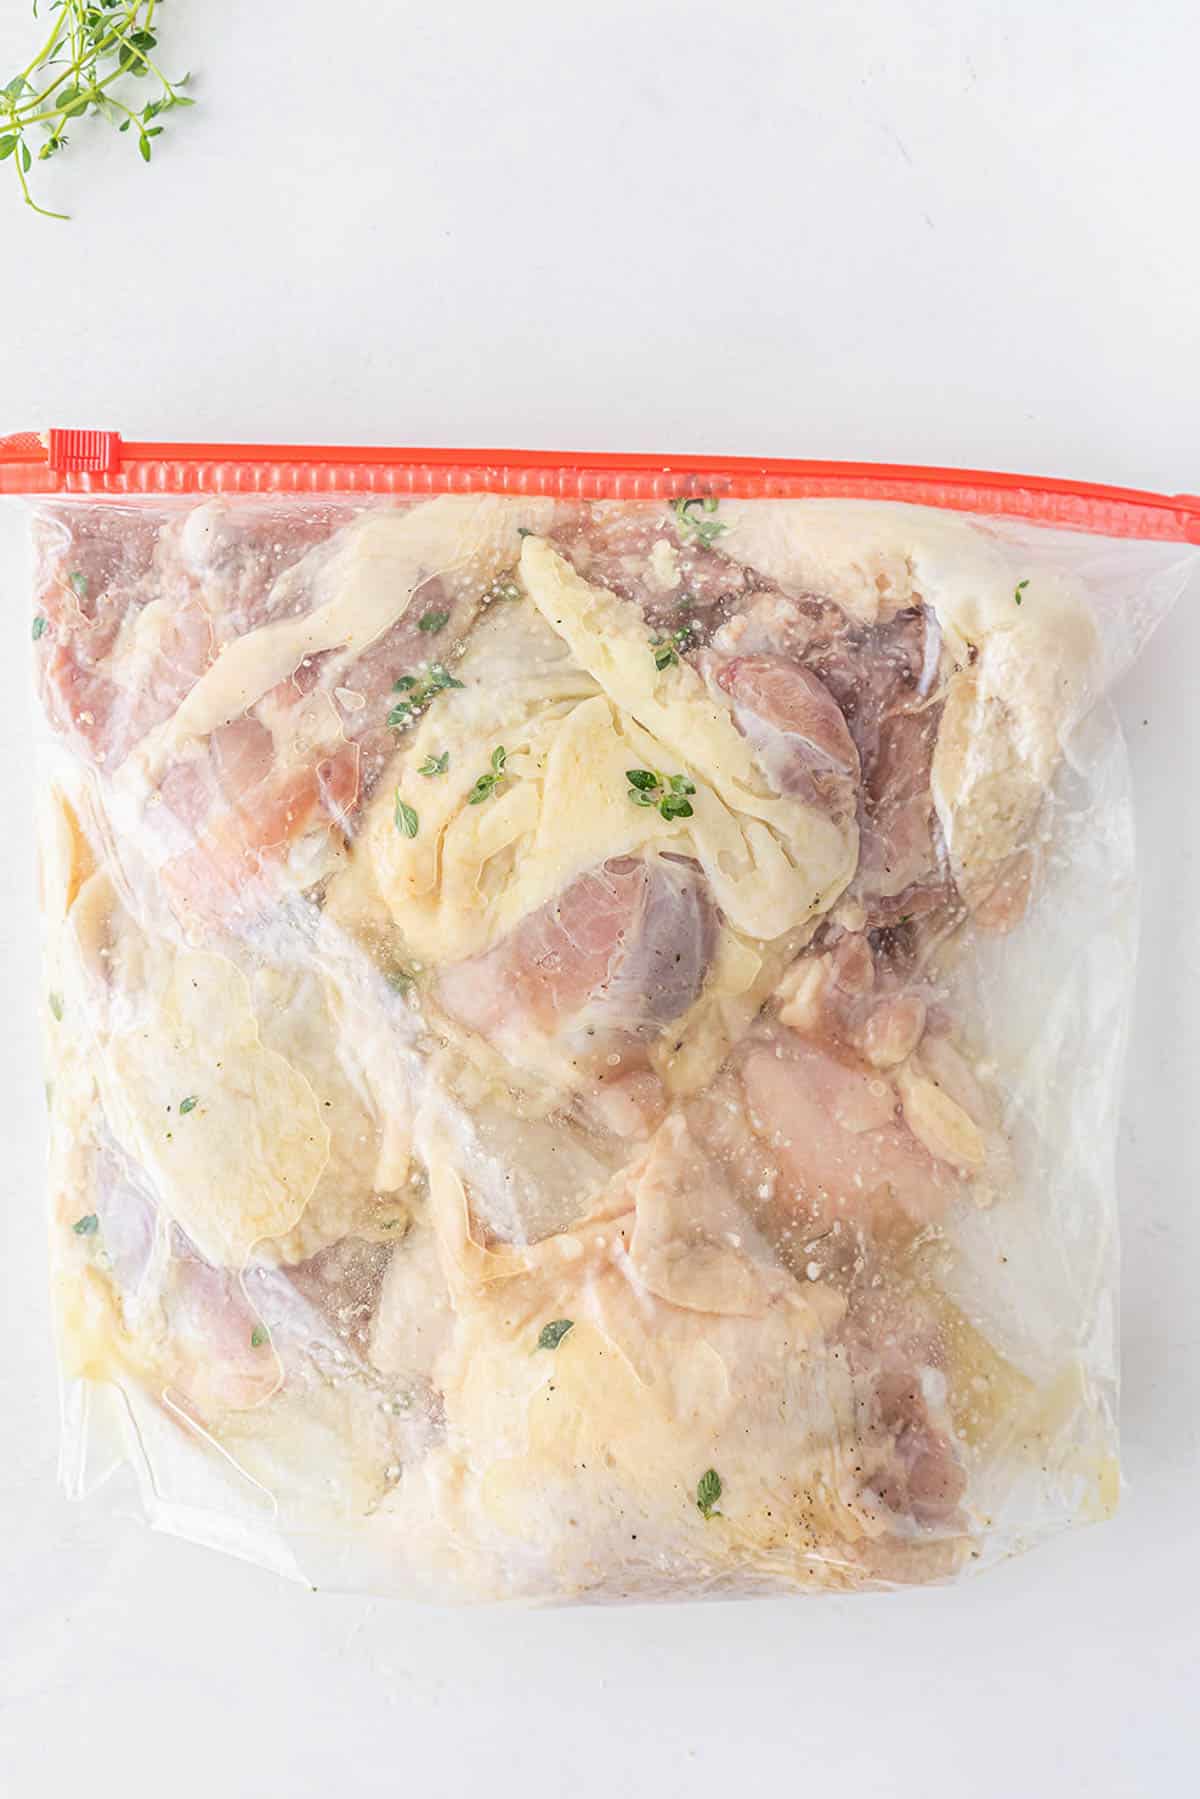 gallon size plastic zip closure bag with raw chicken thighs marinating.